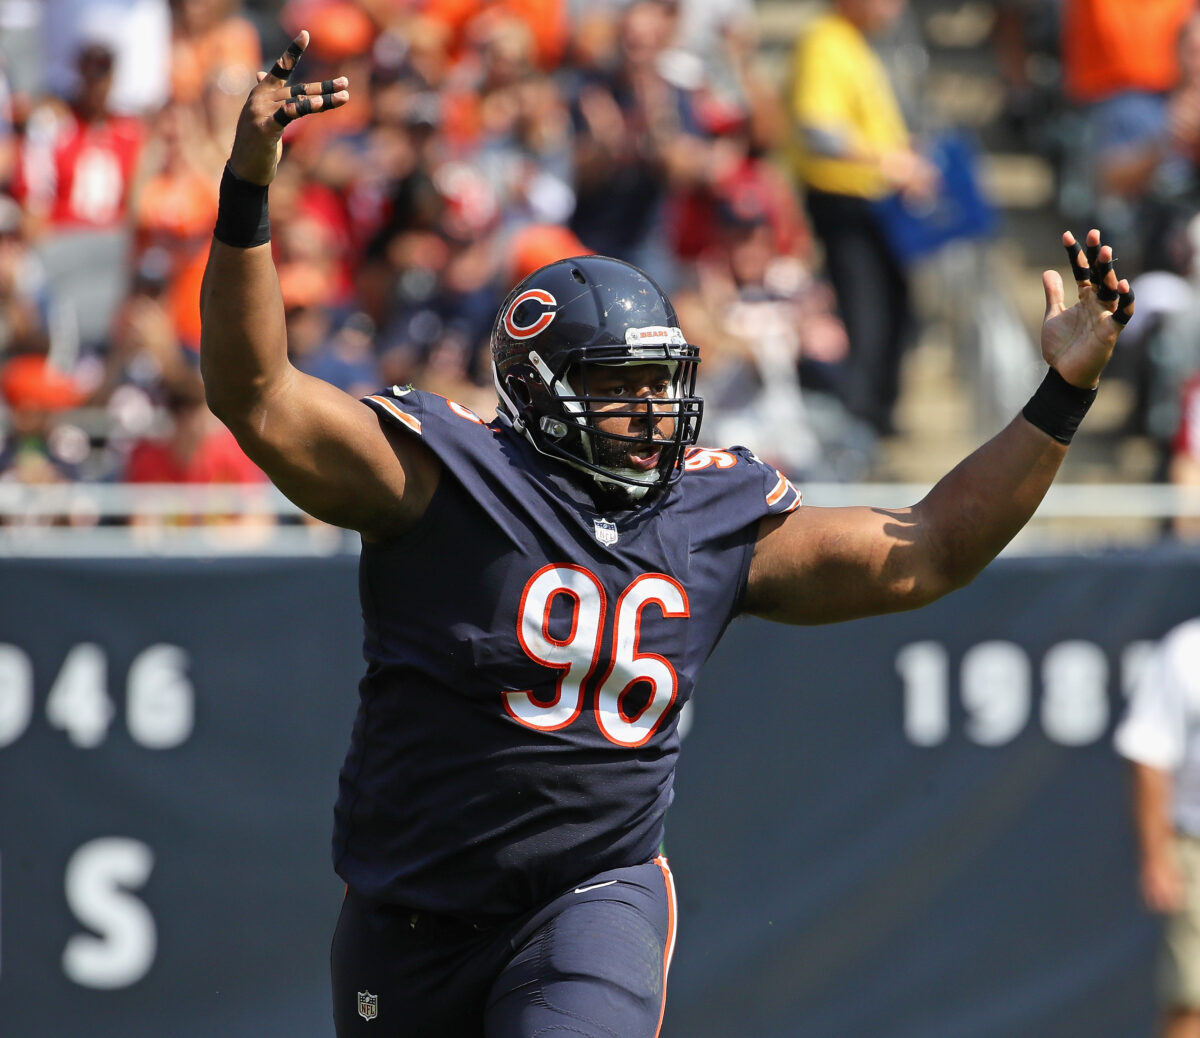 Vic Fangio floated DL Akiem Hicks’ name to Dolphins as potential signing